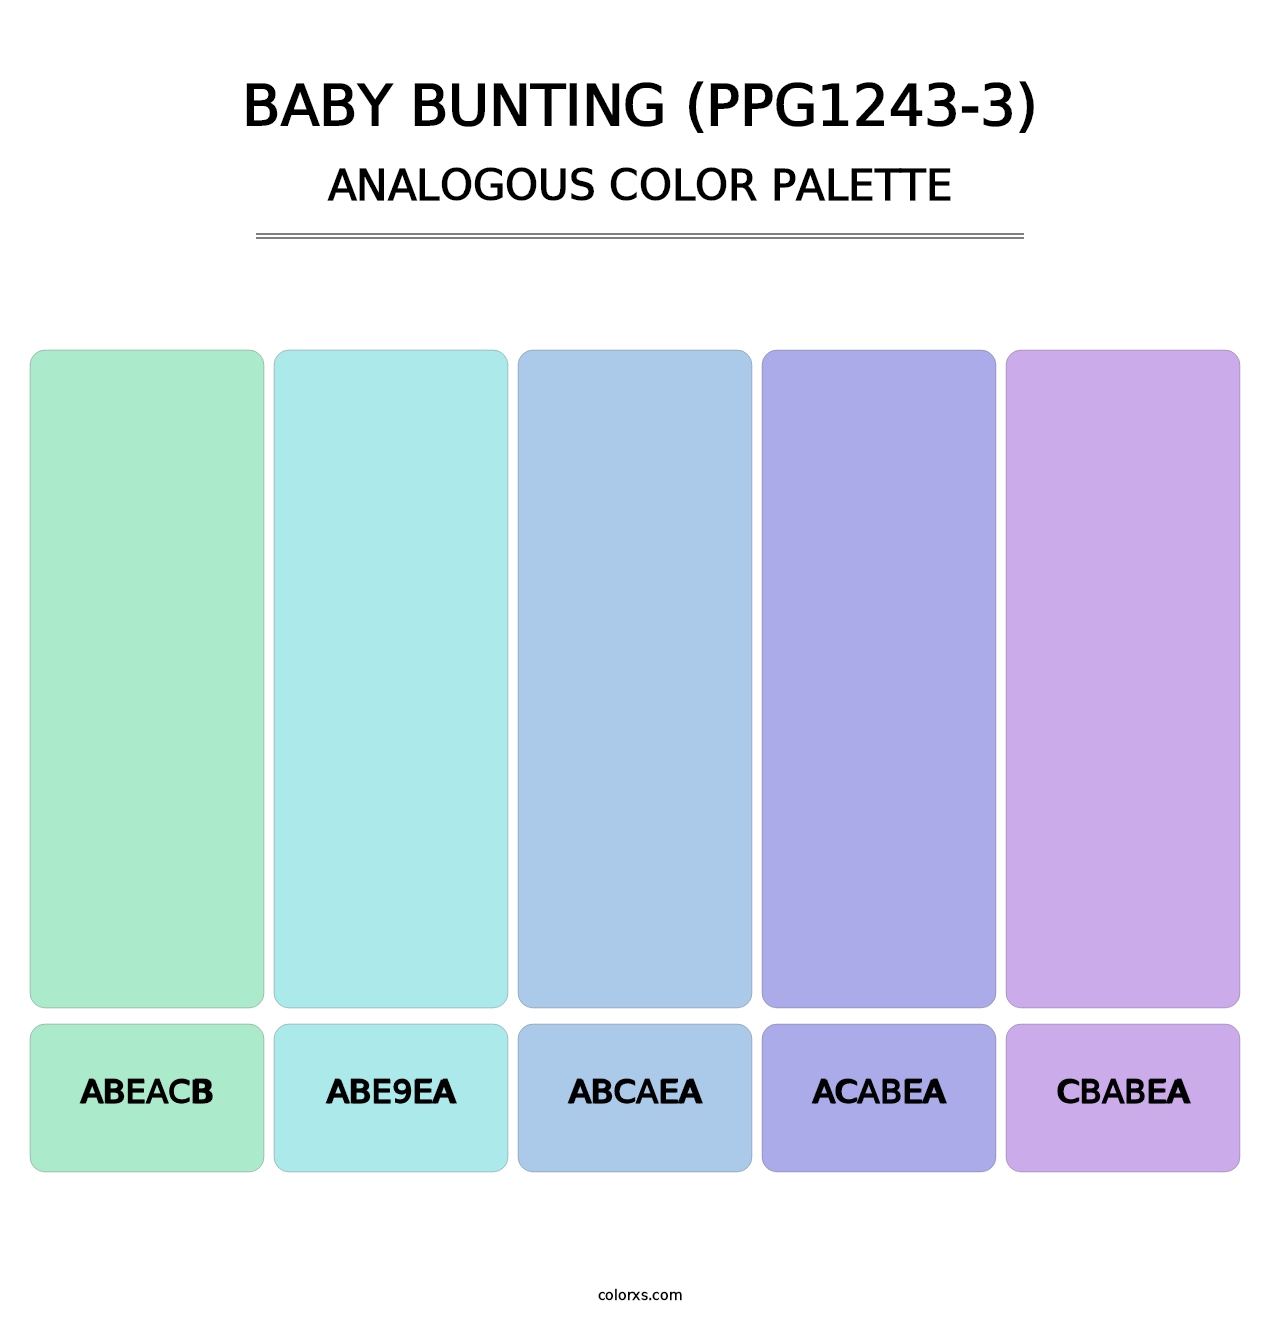 Baby Bunting (PPG1243-3) - Analogous Color Palette